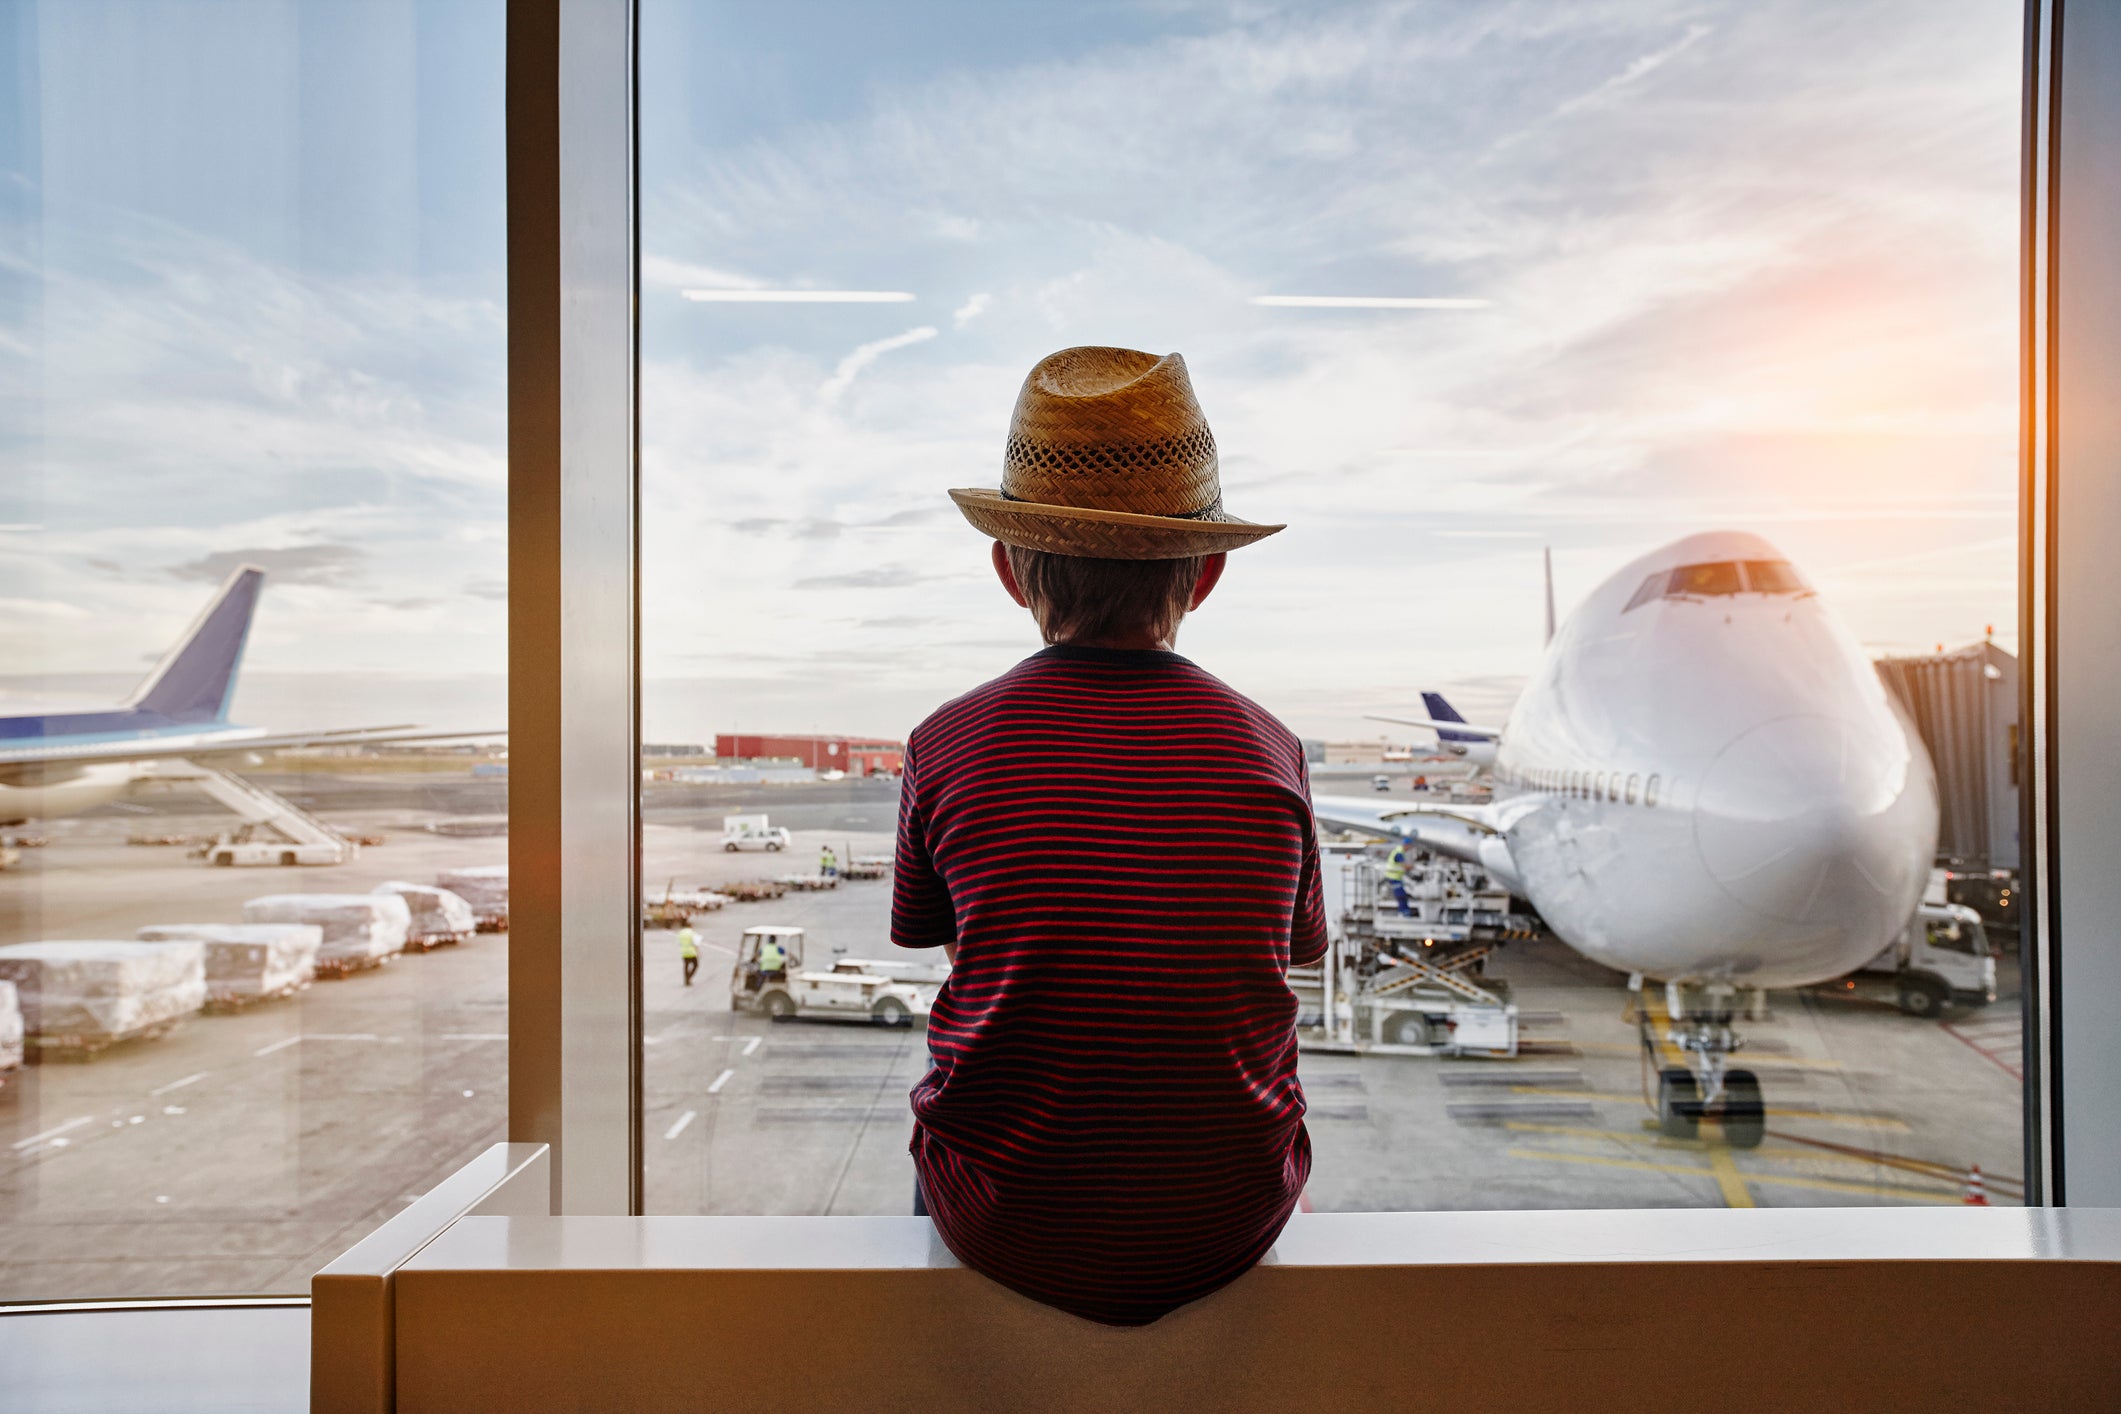 Boy wearing straw hat looking through window to airplane on the apron